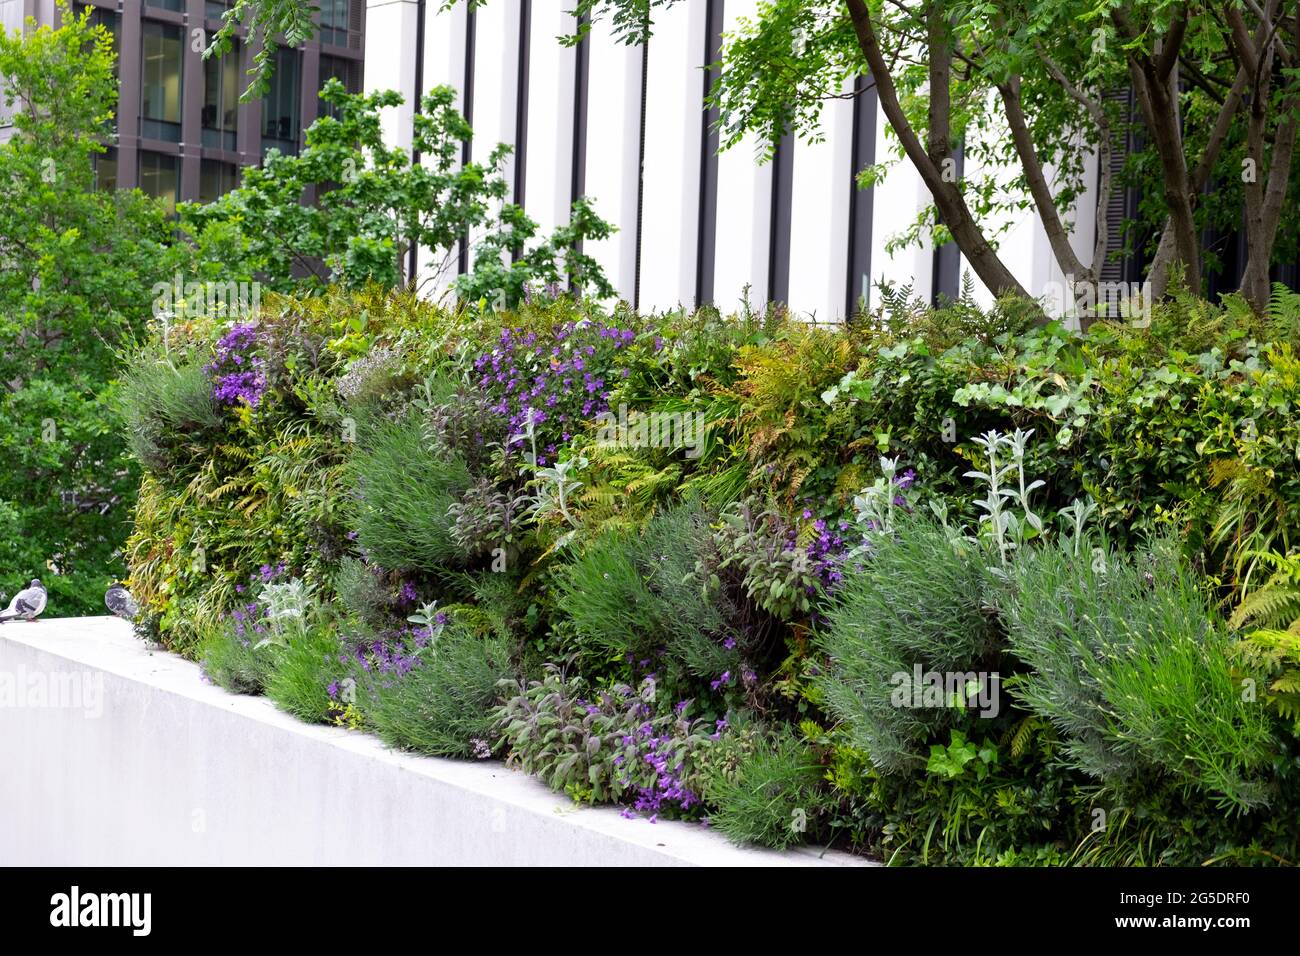 Plants lavender rosemary ivy ferns and purple flowers form a green hedge outside London Wall building in the City of London UK  England  KATHY DEWITT Stock Photo